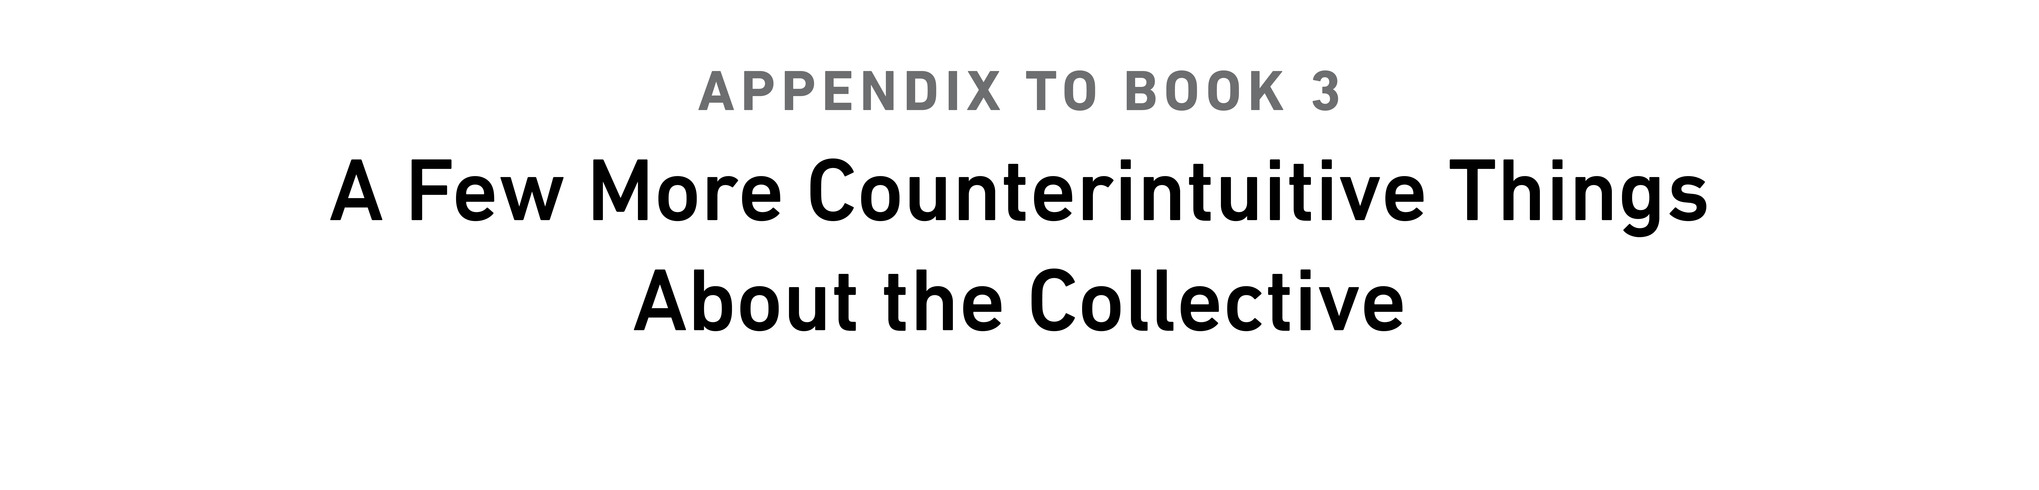 Appendix to book 3 A Few More Counterintuitive Things About the Collective